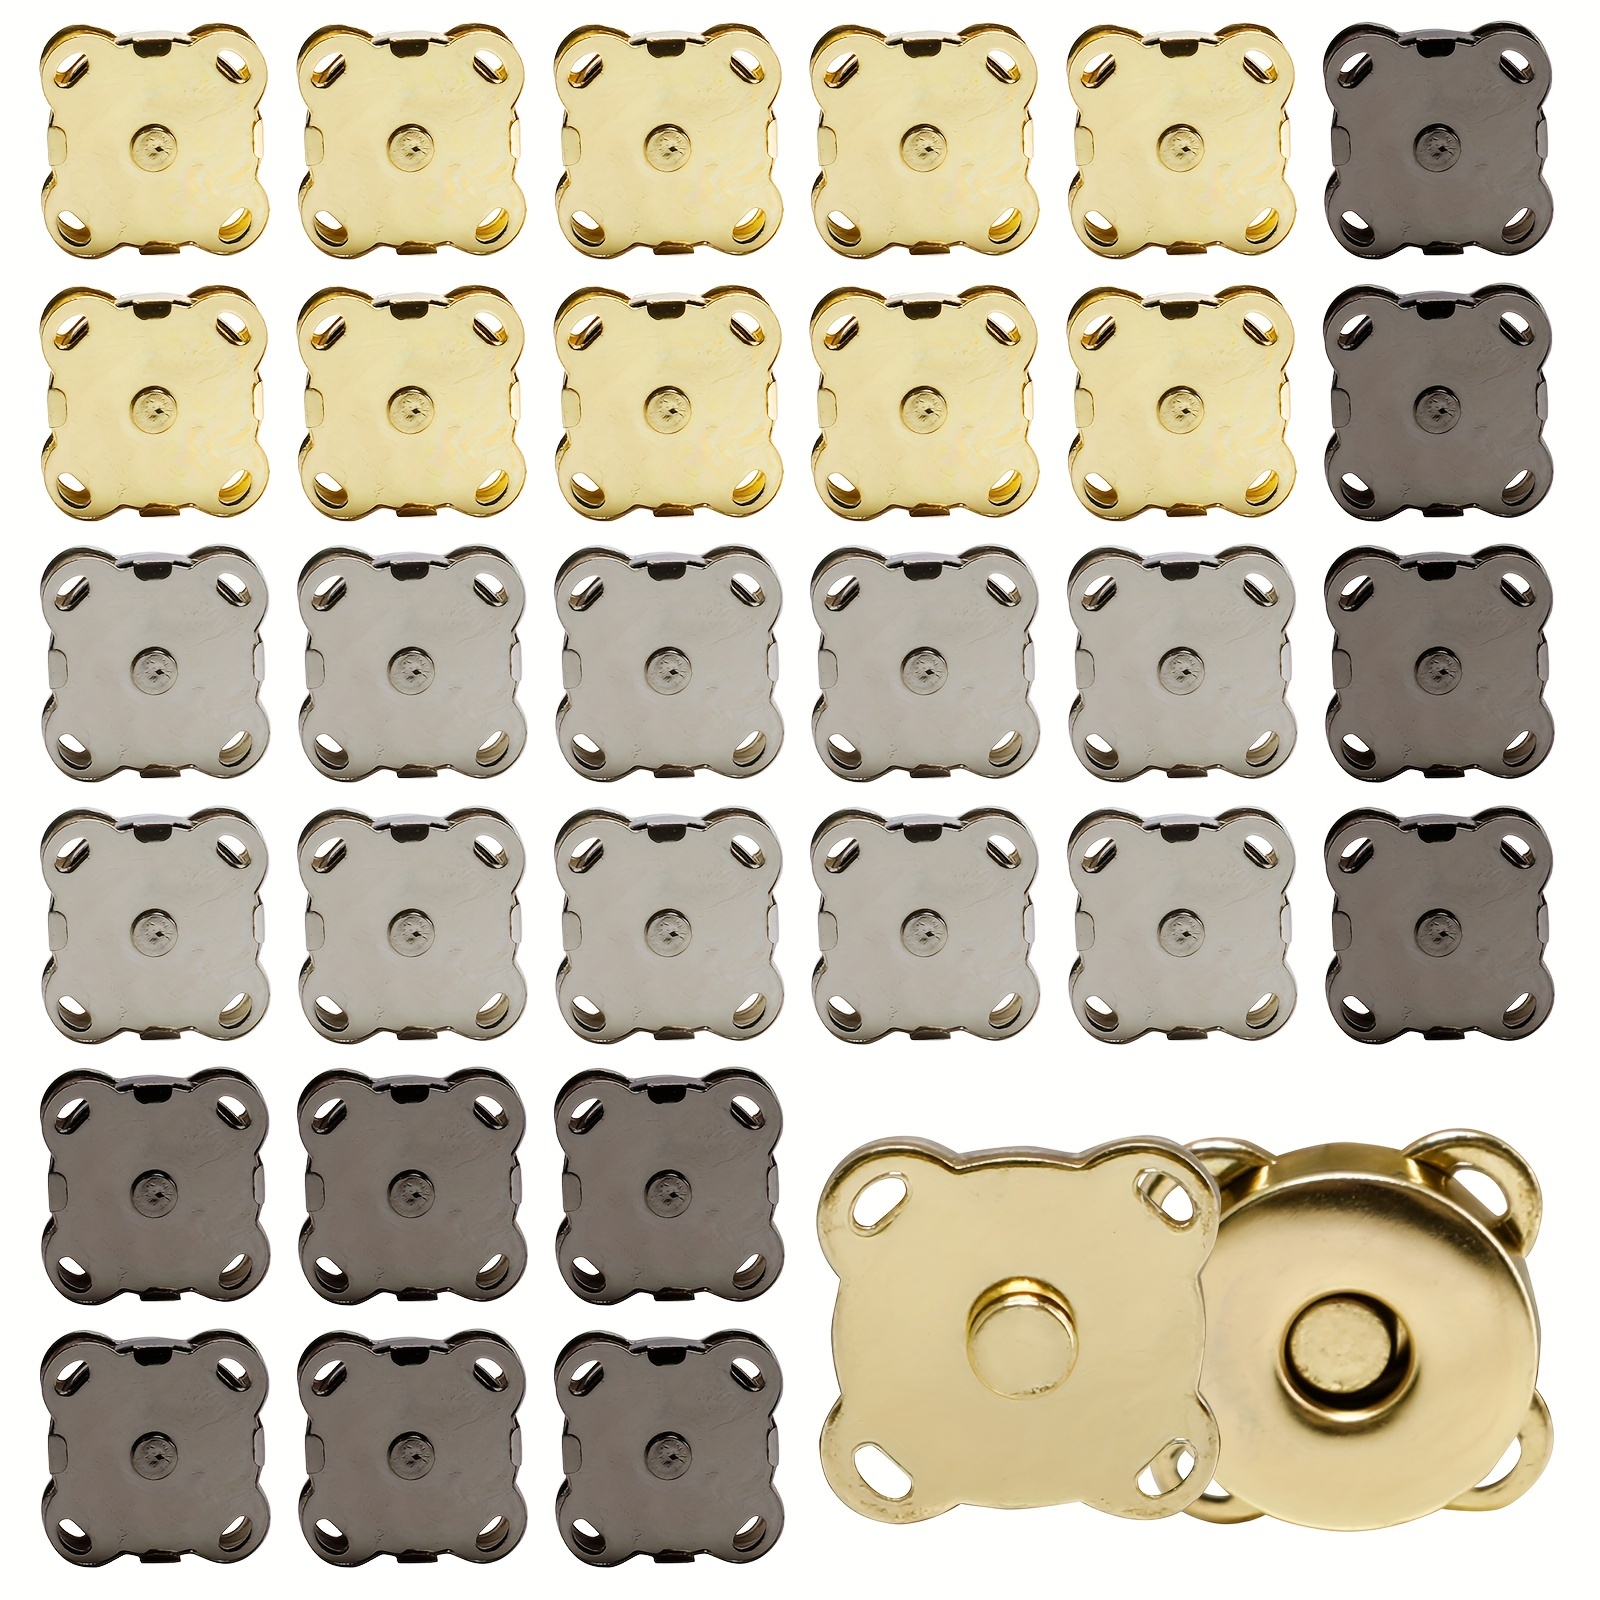 

30pcs Plum Magnetic Snap Buttons For Clothes Purse Handbag Scrapbook Homemade Sewing Craft (black+golden+silvery)